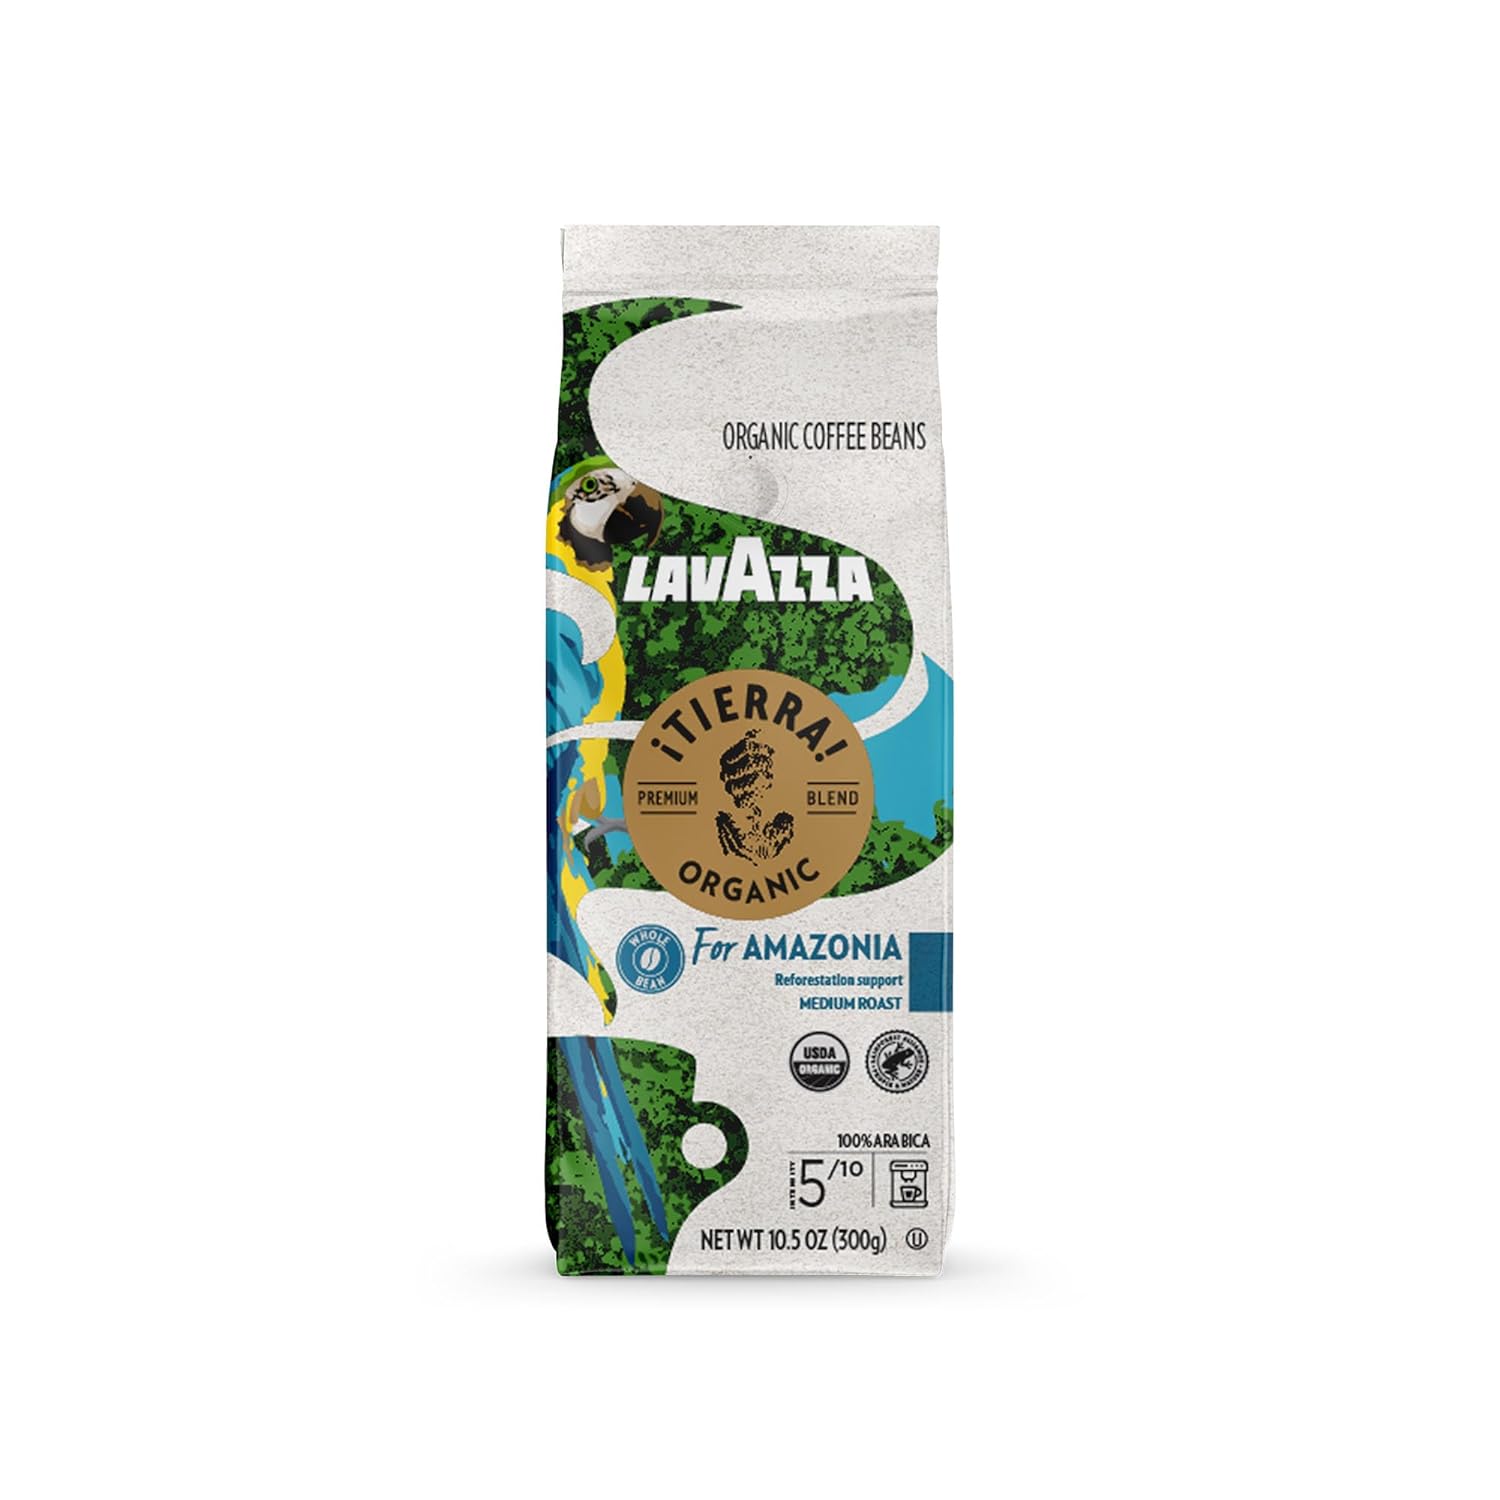 Lavazza ¡Tierra! Organic Amazonia Whole Bean Coffee Medium Roast, Floral Notes, 10.5 Ounce (Pack of 6) - Packaging May Vary